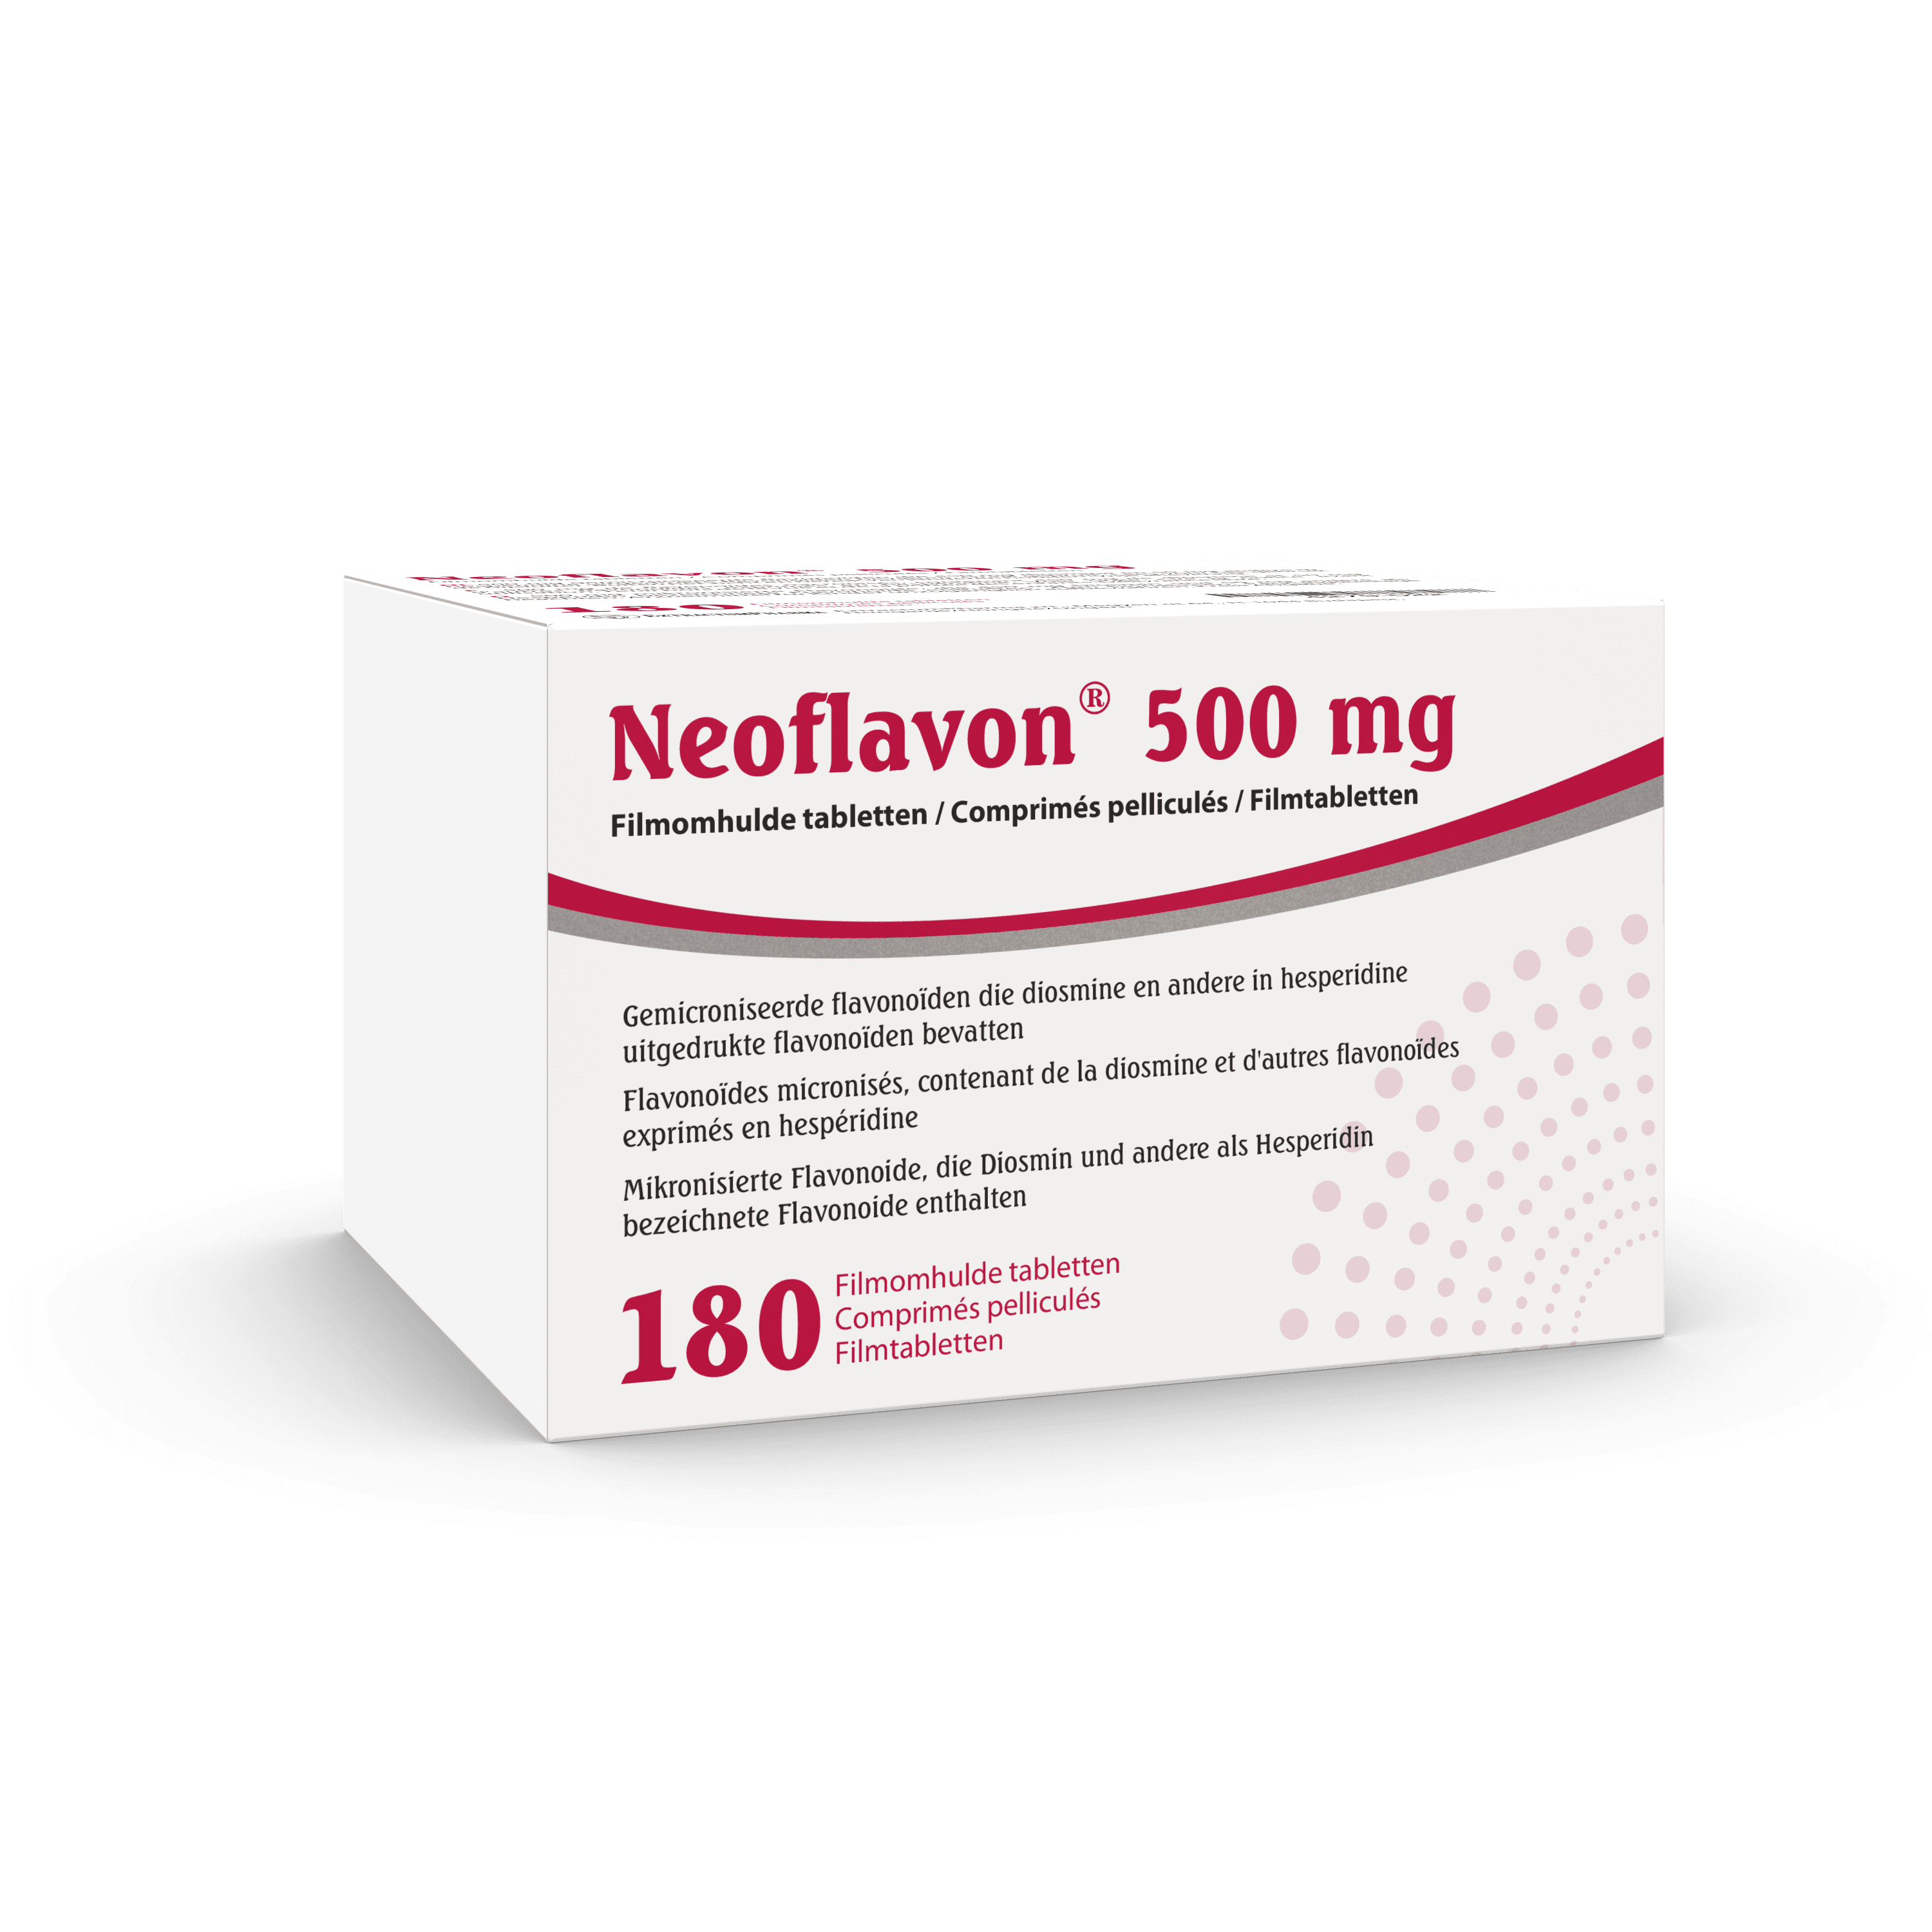 Neoflavon 500 mg